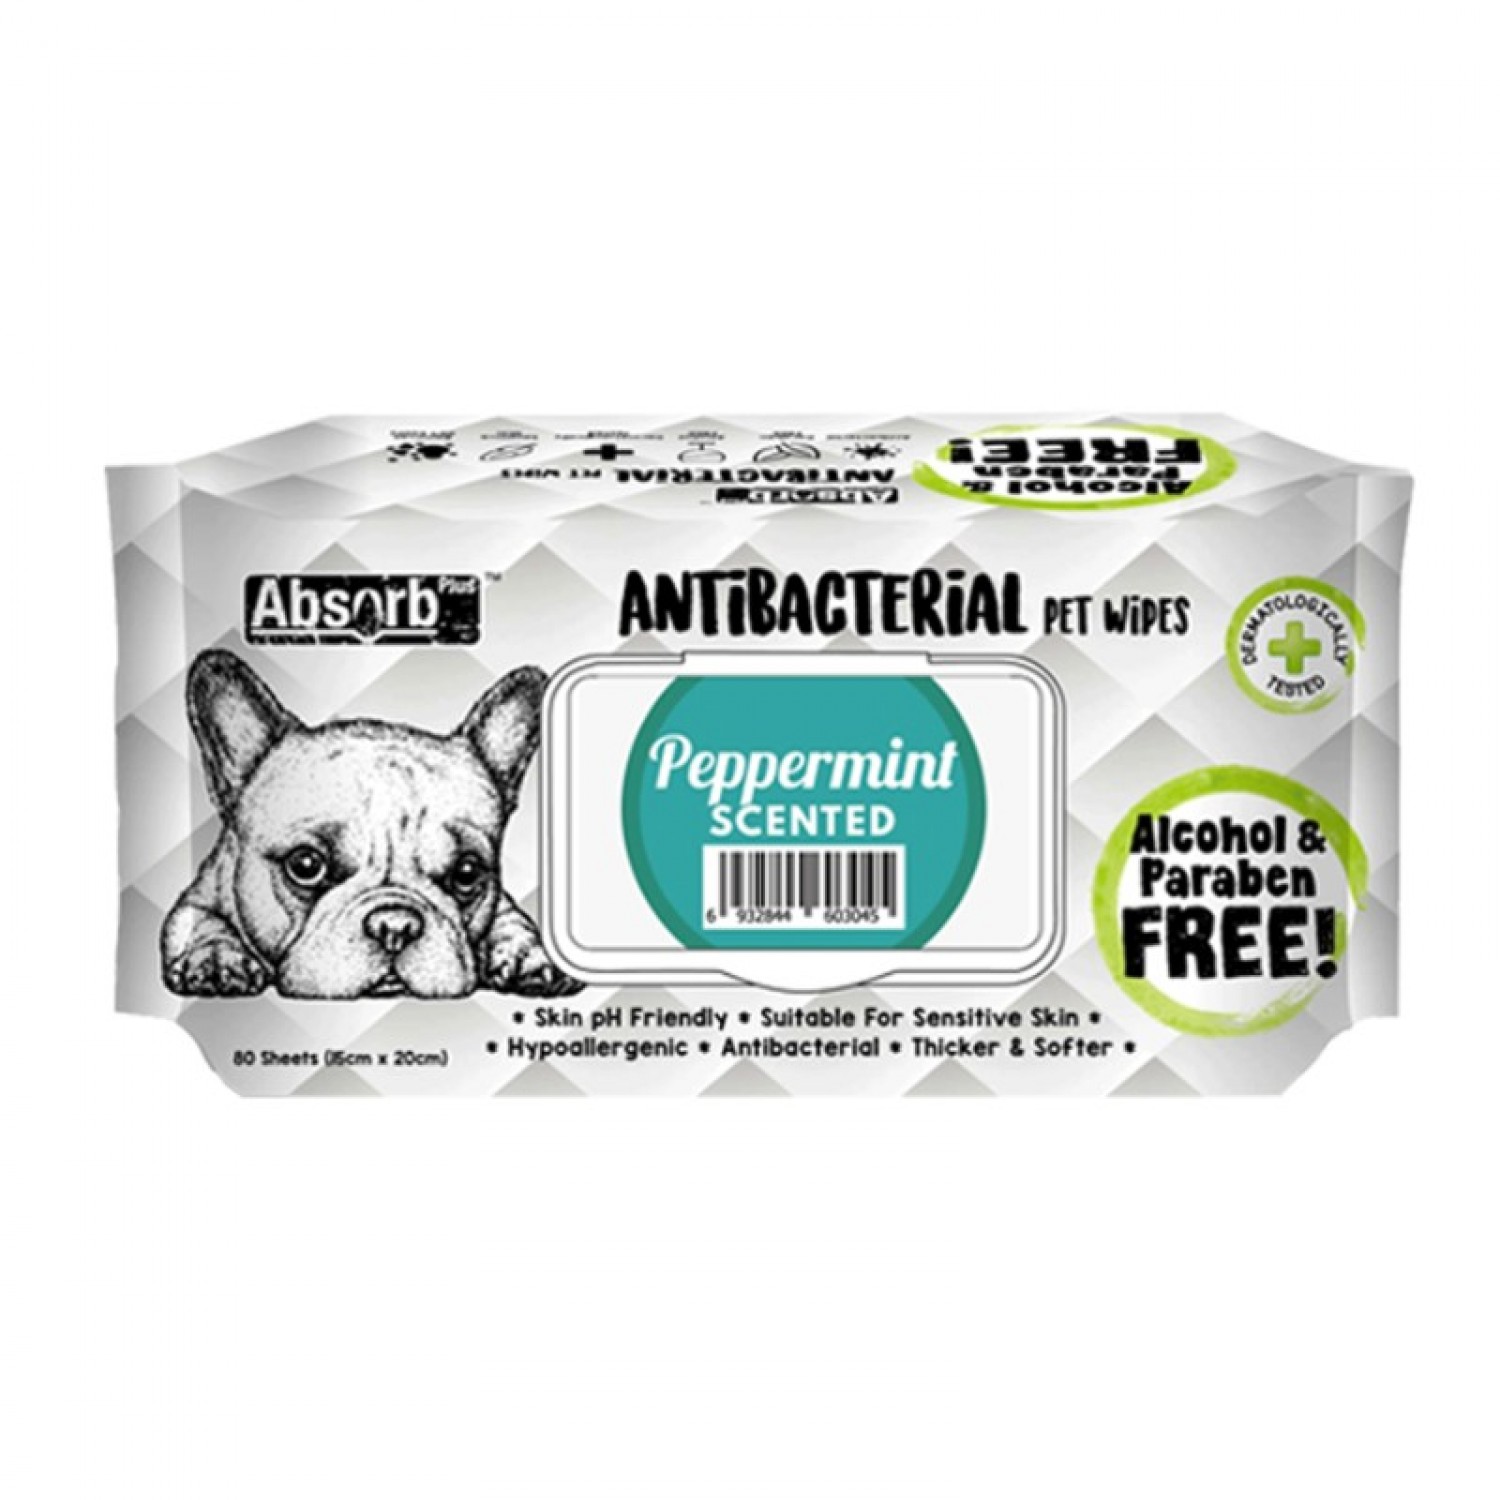 Absolute Pet Absorb Plus Antibacterial Pet Wipes Peppermint 80 sheets